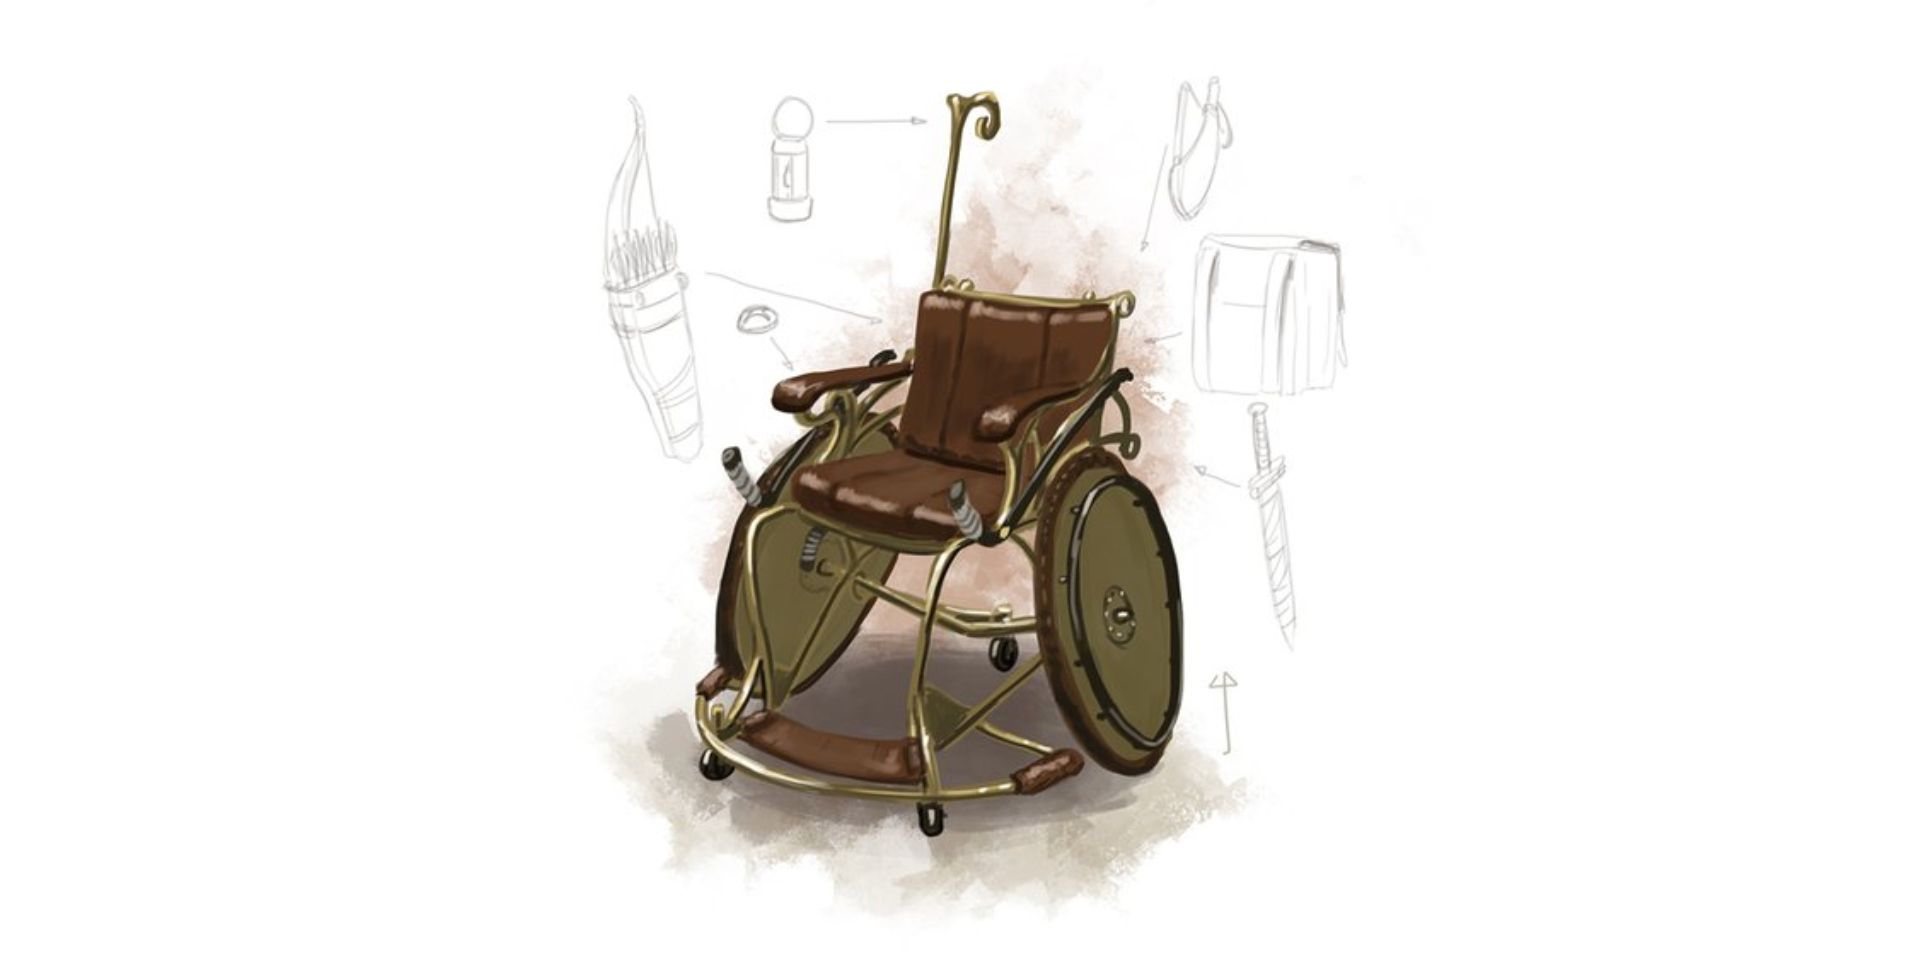 Why D&D’s Combat Wheelchair Is A Good Start For Disabled Representation